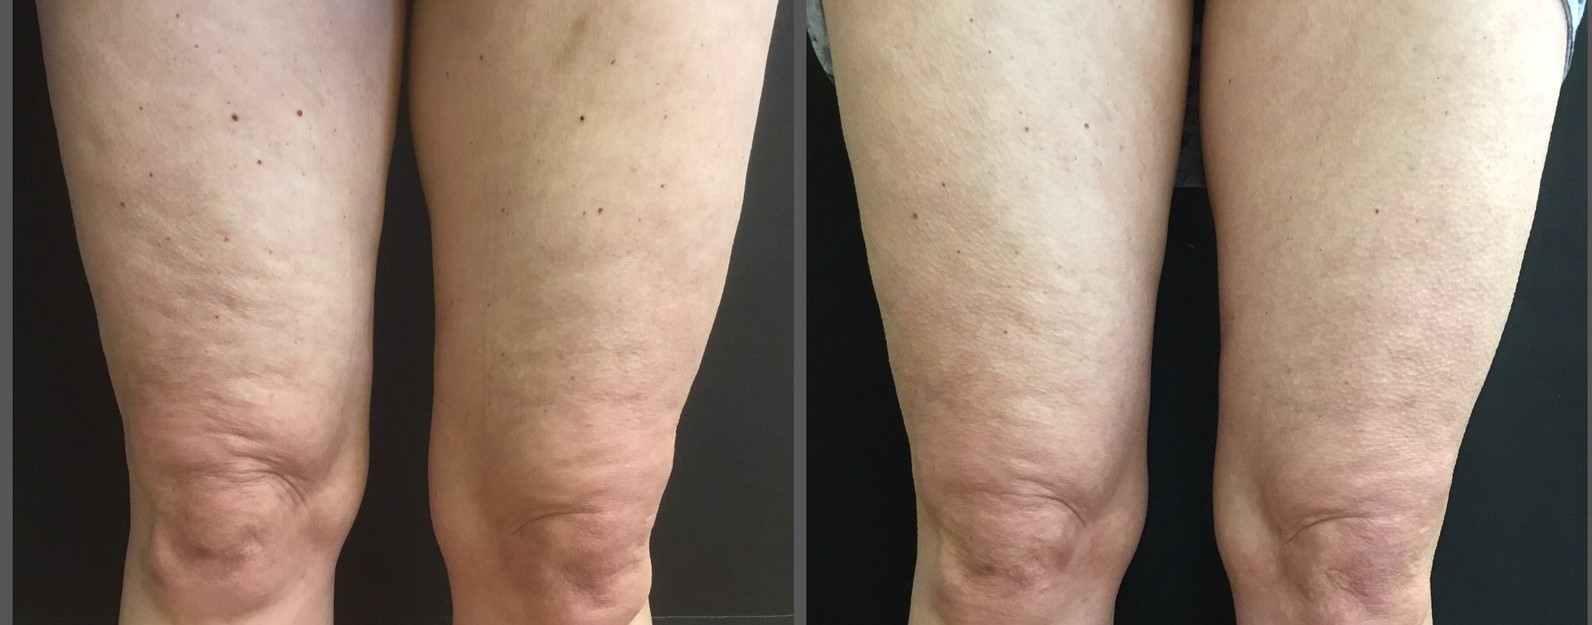 Cellulite treatment update: We can now treat virtually all types of dimples  - SkinCare Physicians